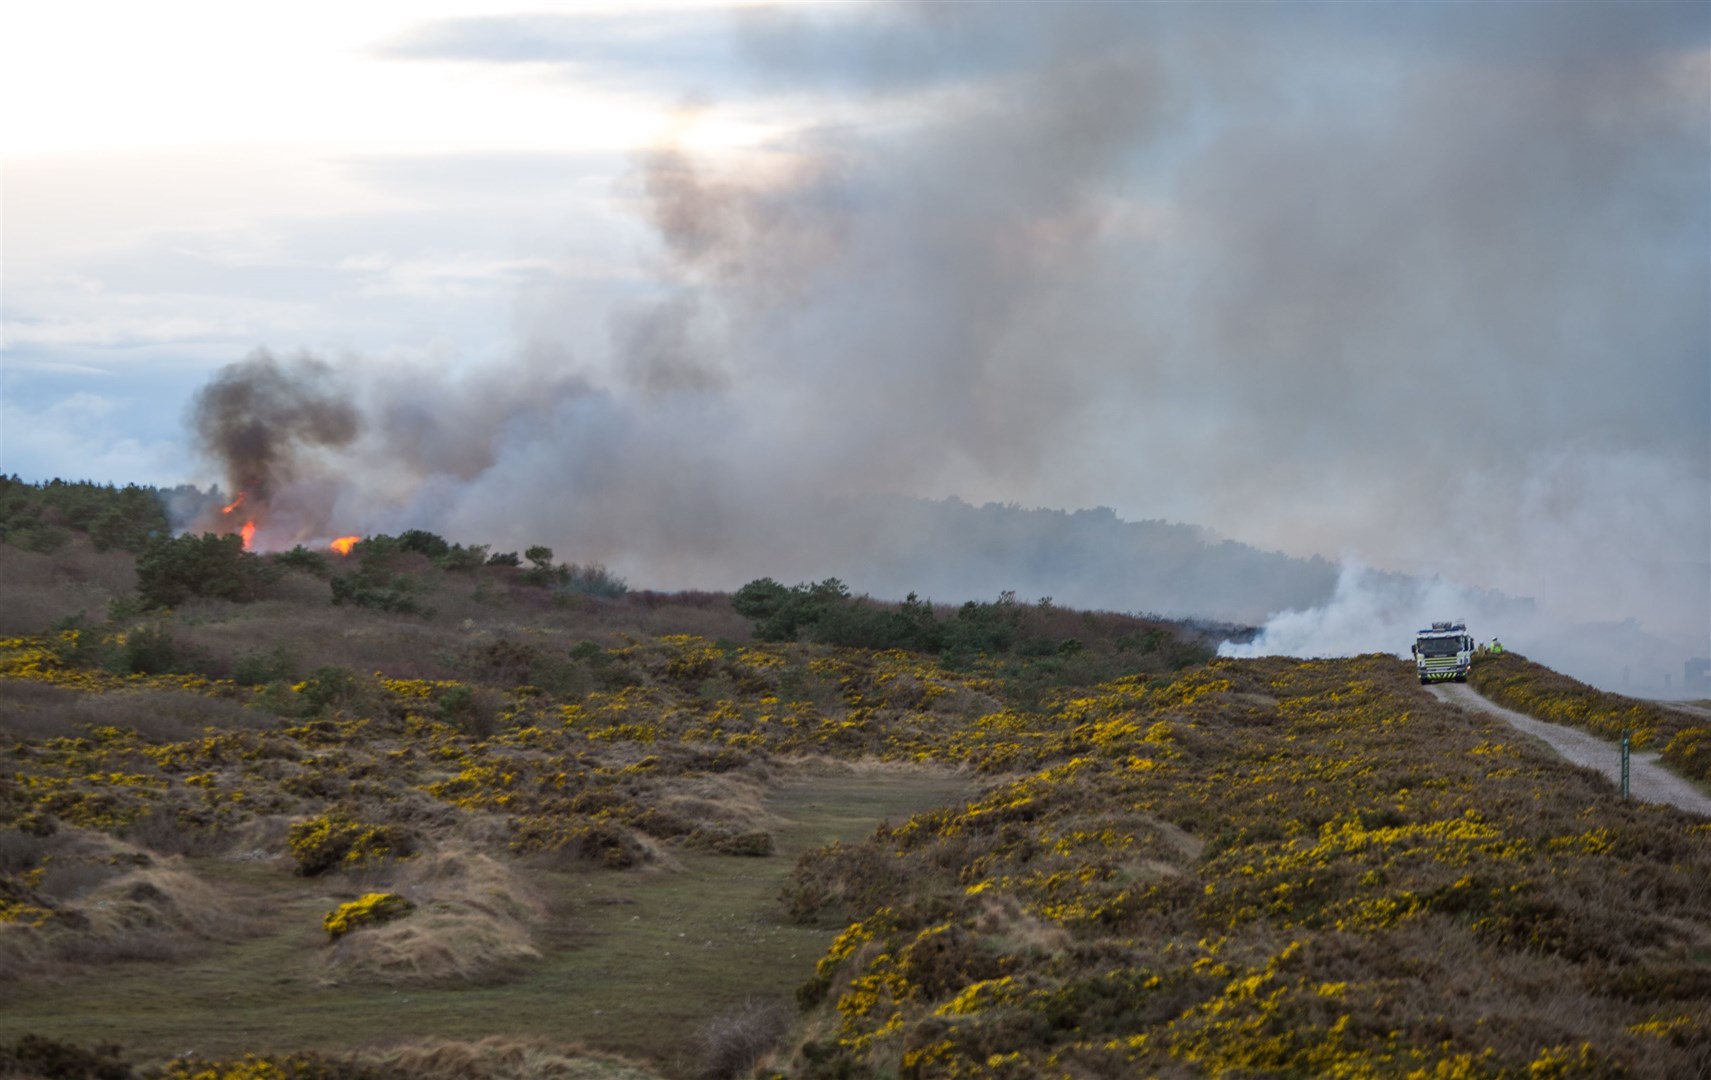 The fire rages through the gorse. Picture: Becky Saunderson